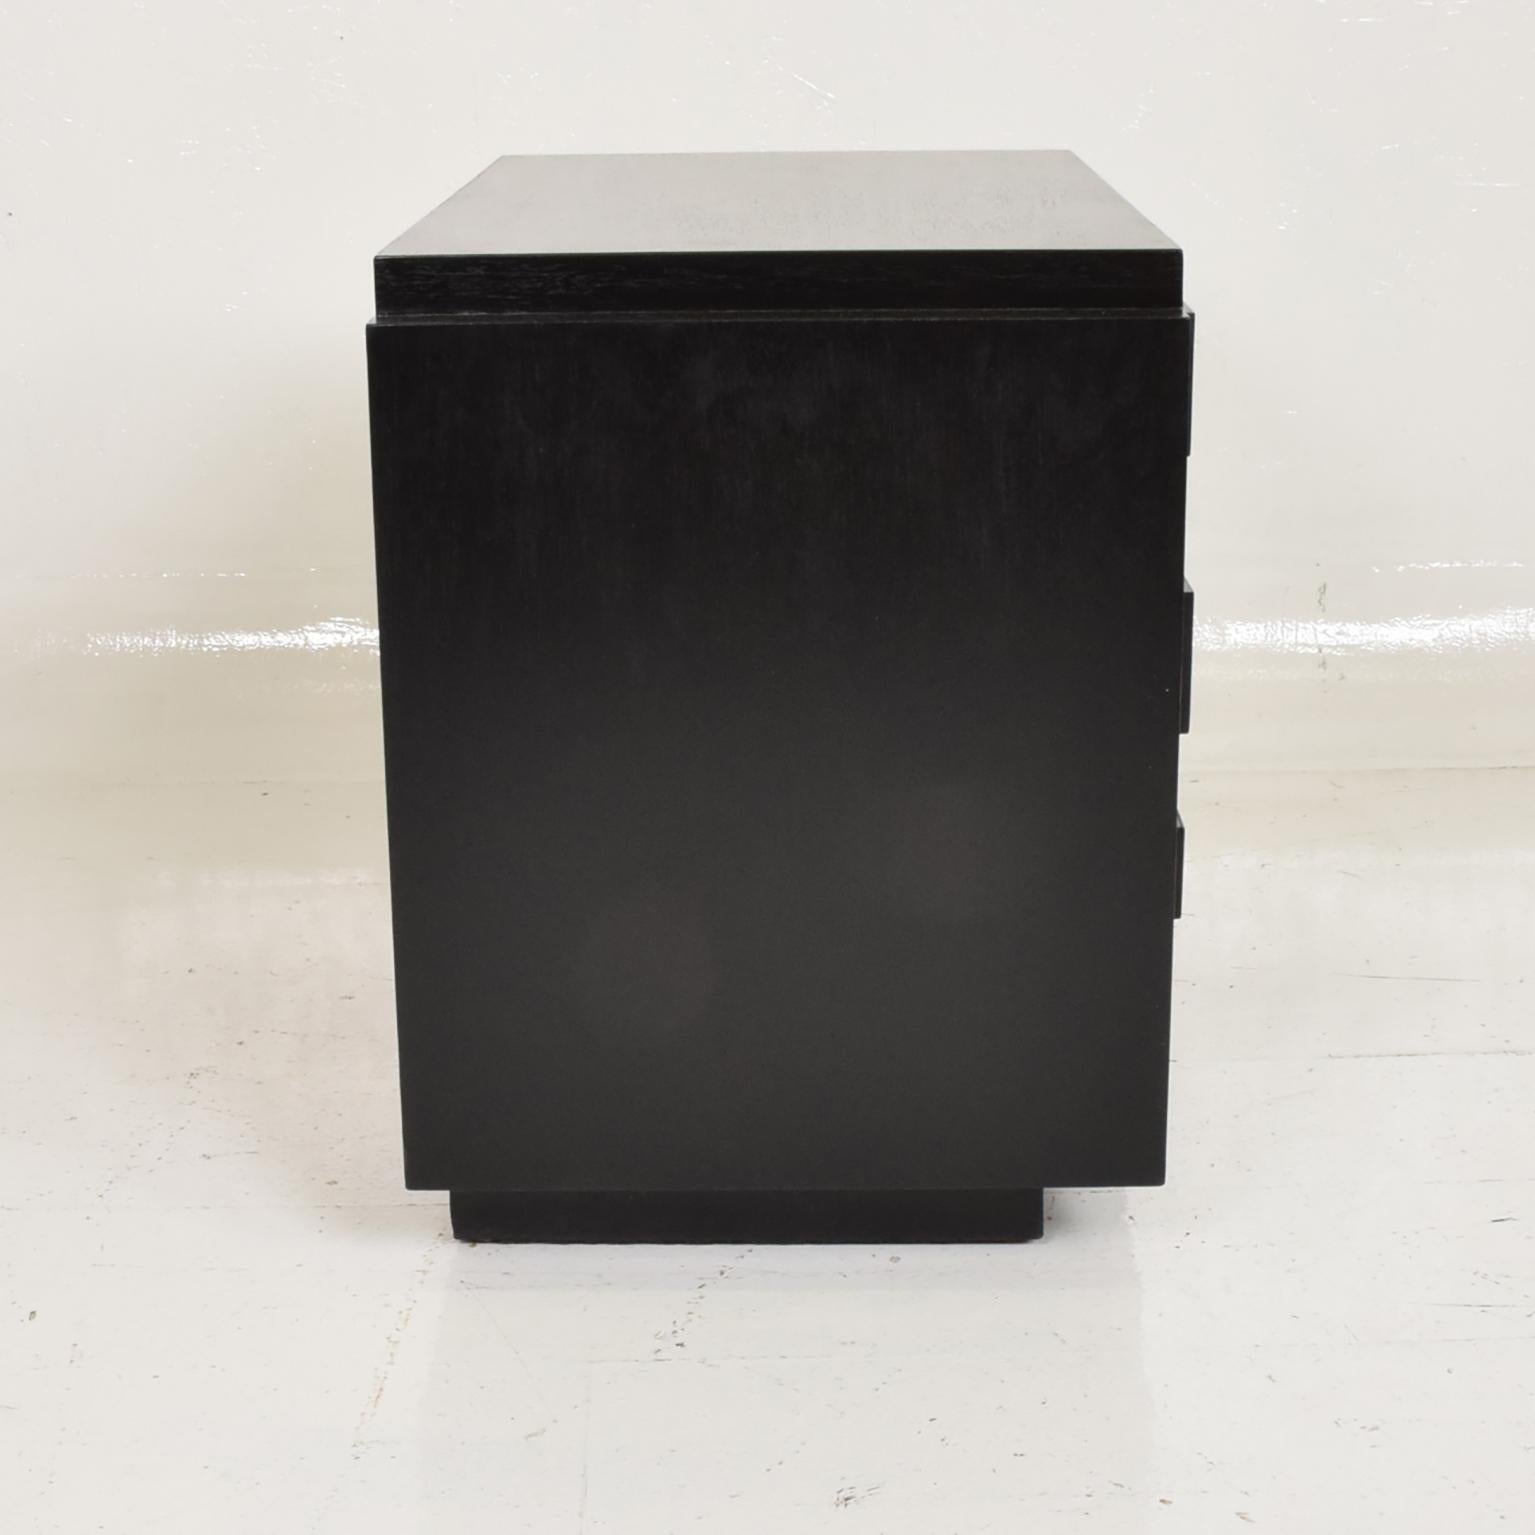 Mid Century Modern Lane Brutalist Nightstand in Ebonized Walnut Wood. 
Made by Lane of Alta Vista, USA circa the 1970s. 
Features Two doors with Detailed Mosaic Patchwork and Open storage. 
Dimensions: 22 1/4